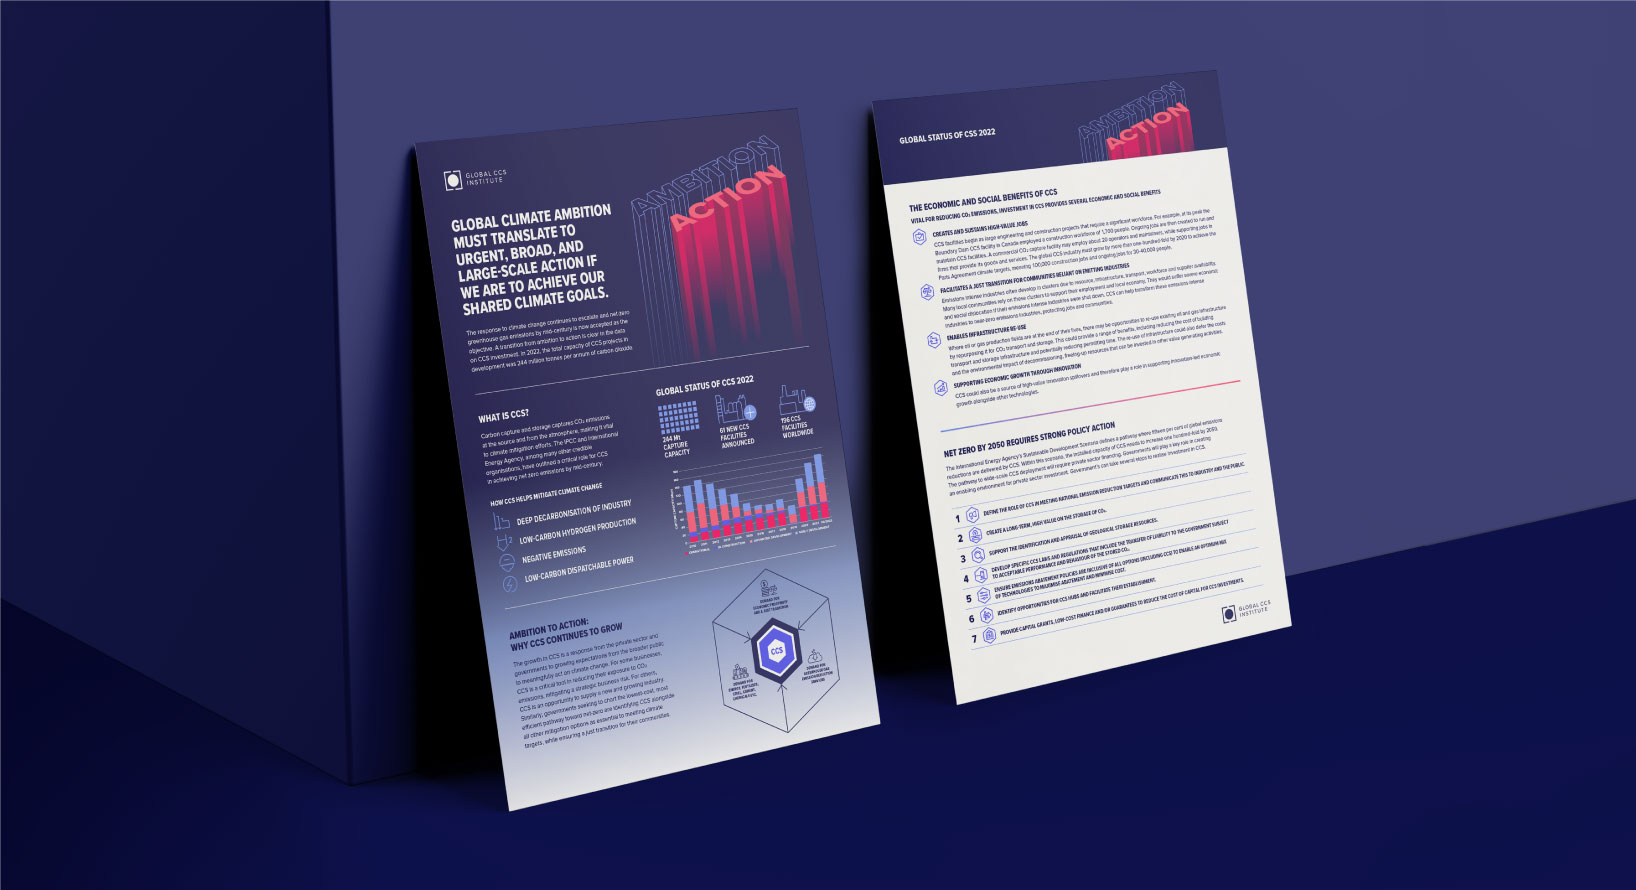 Global Carbon Capture factsheets presenting top line information about the institute and their goals